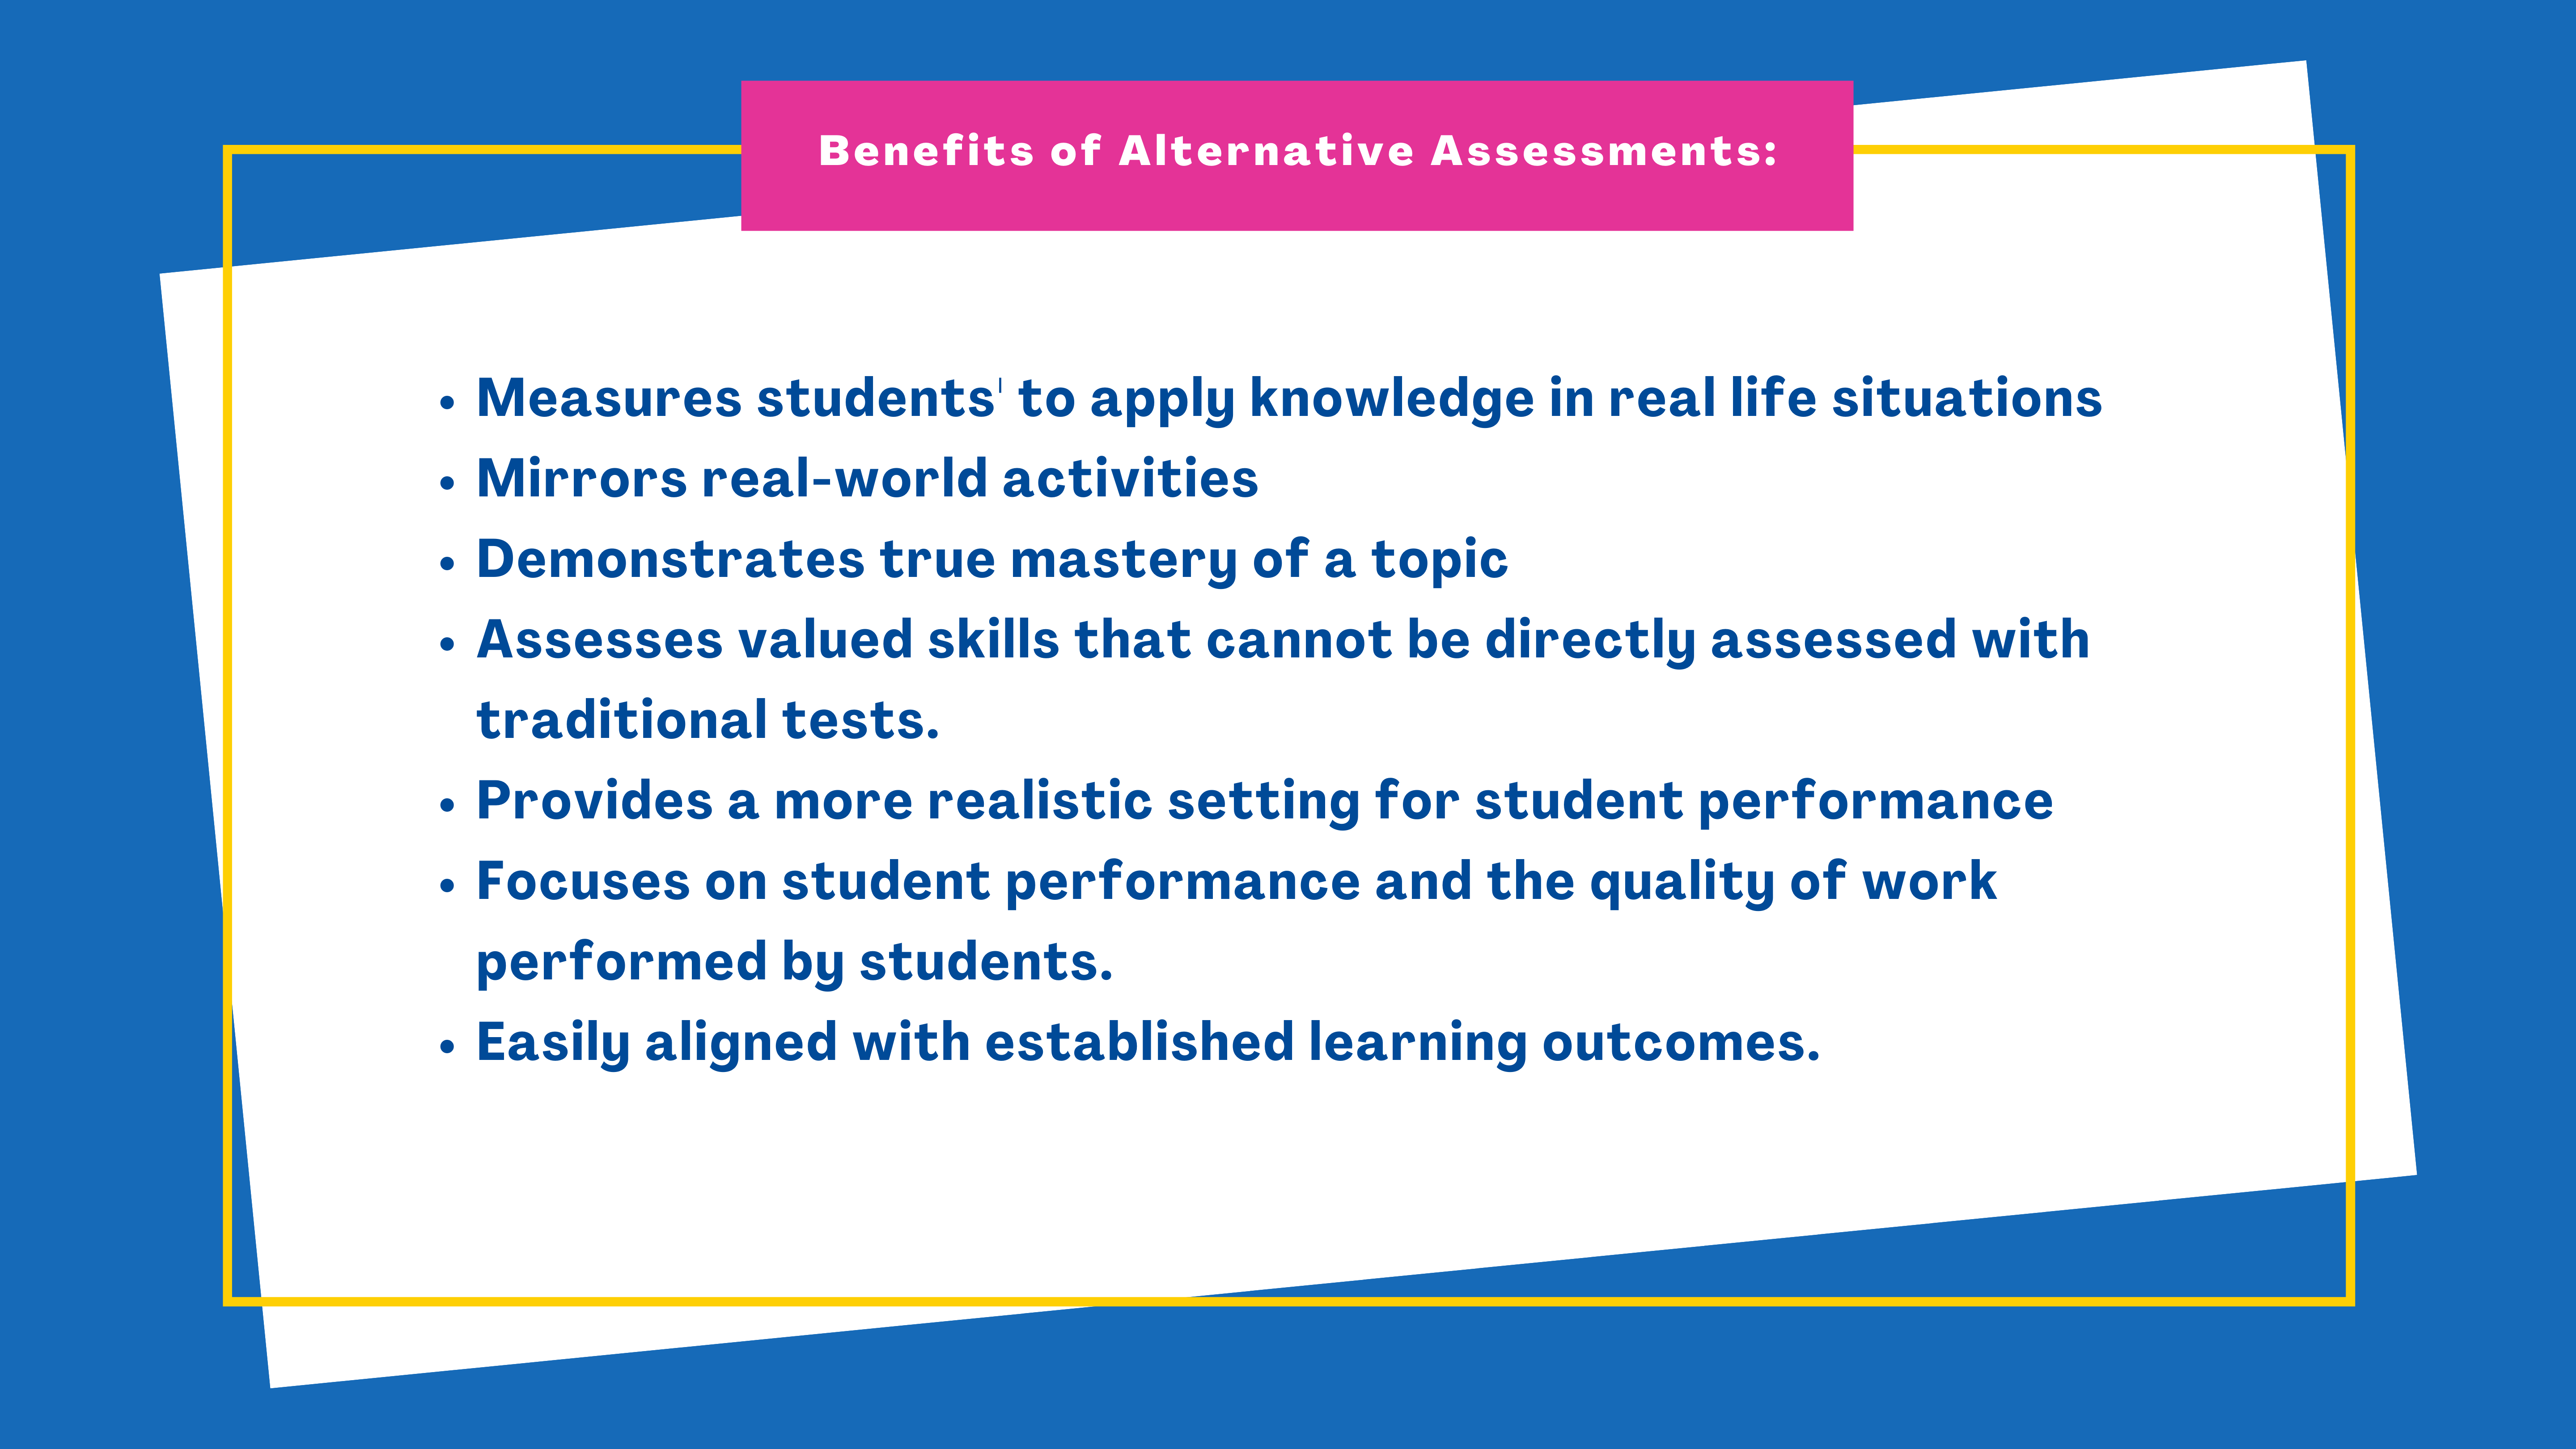 Benefits of Alternative Assessments:

Measures students' to apply knowledge in real life situations.
Mirrors real-world activities.
Demonstrates true mastery of a topic.
Assesses valued skills that cannot be directly assessed with traditional tests.
Provides a more realistic setting for student performance.
Focuses on student performance and the quality of work performed by students.
Easily aligned with established learning outcomes.